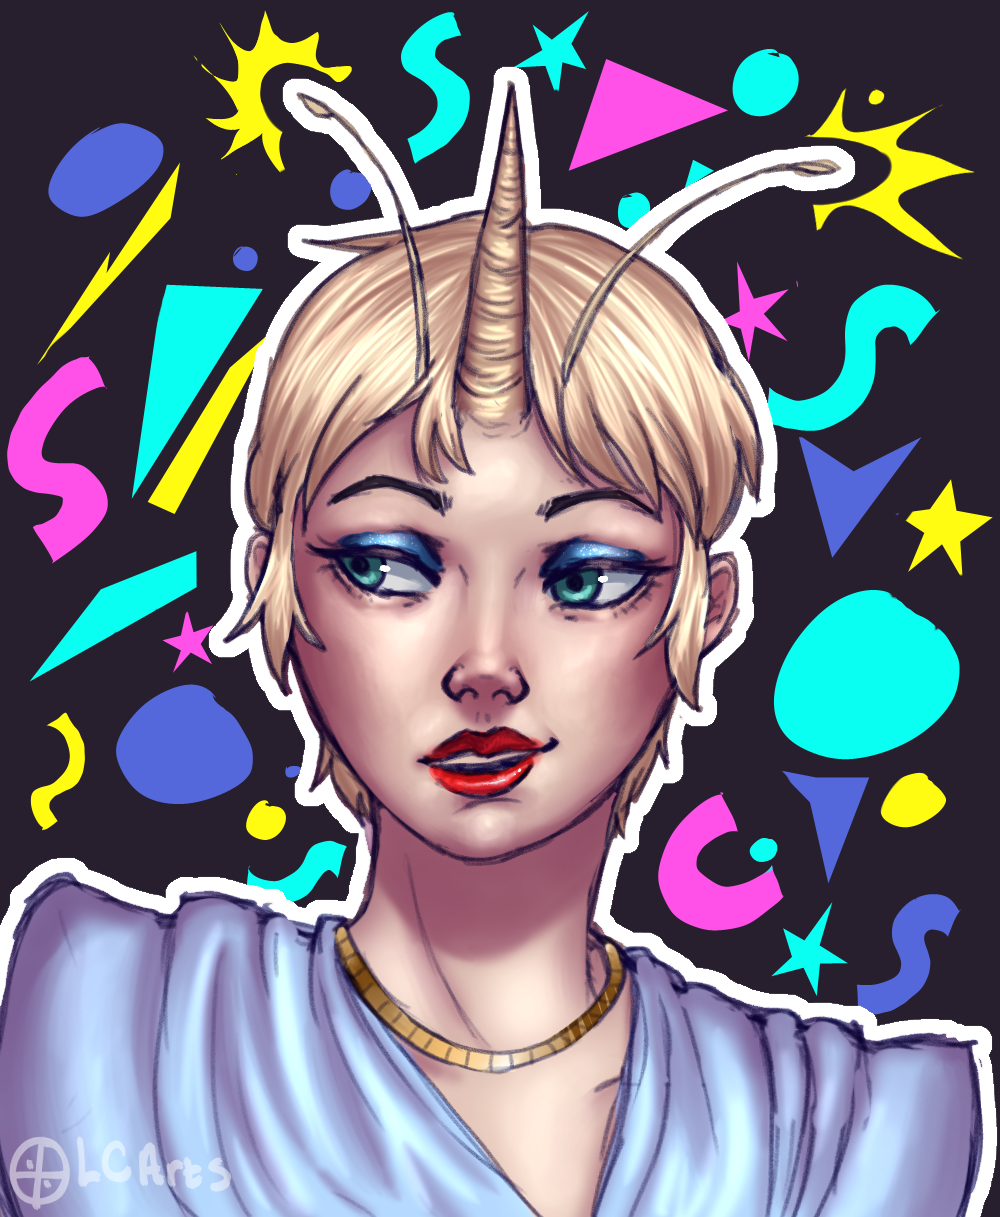 bust of teresa with antenna and horn protruding from her head; she's wearing a gold chain and blue eyeshadow and red lipstick. the background is filled with colorful shapes